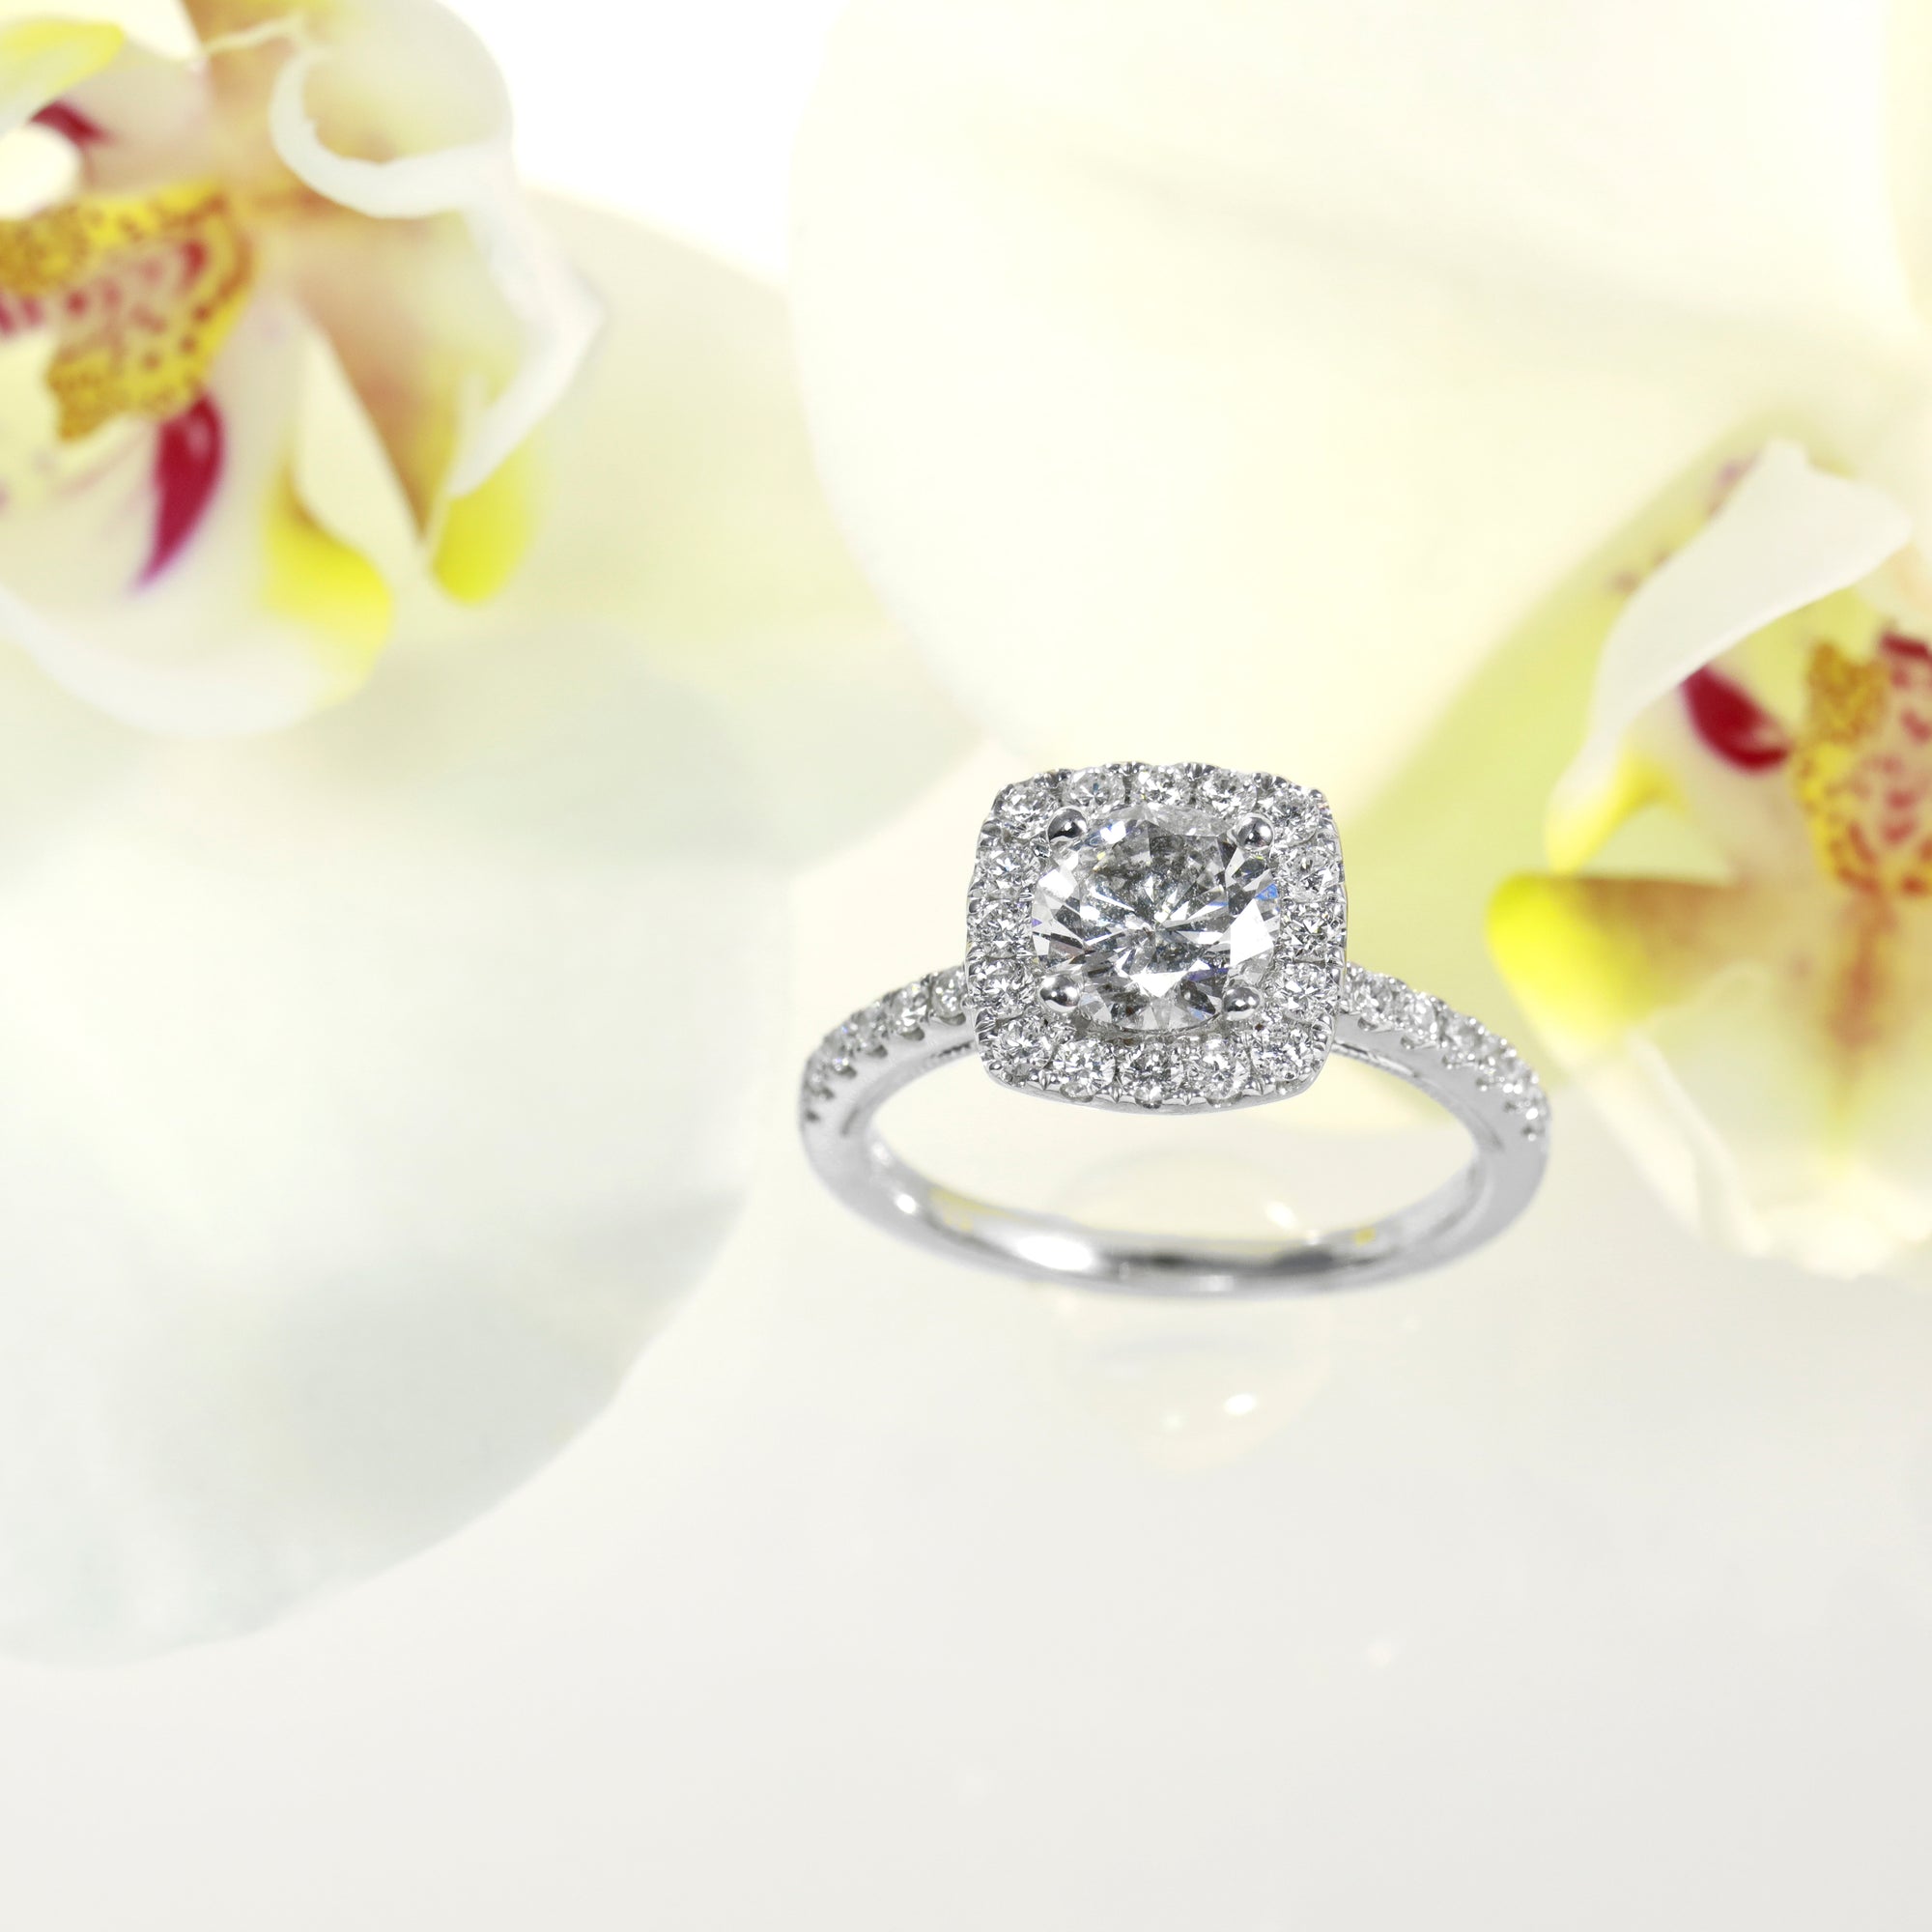 14K White Gold 0.90ct Diamond Engagement Ring With Square Halo